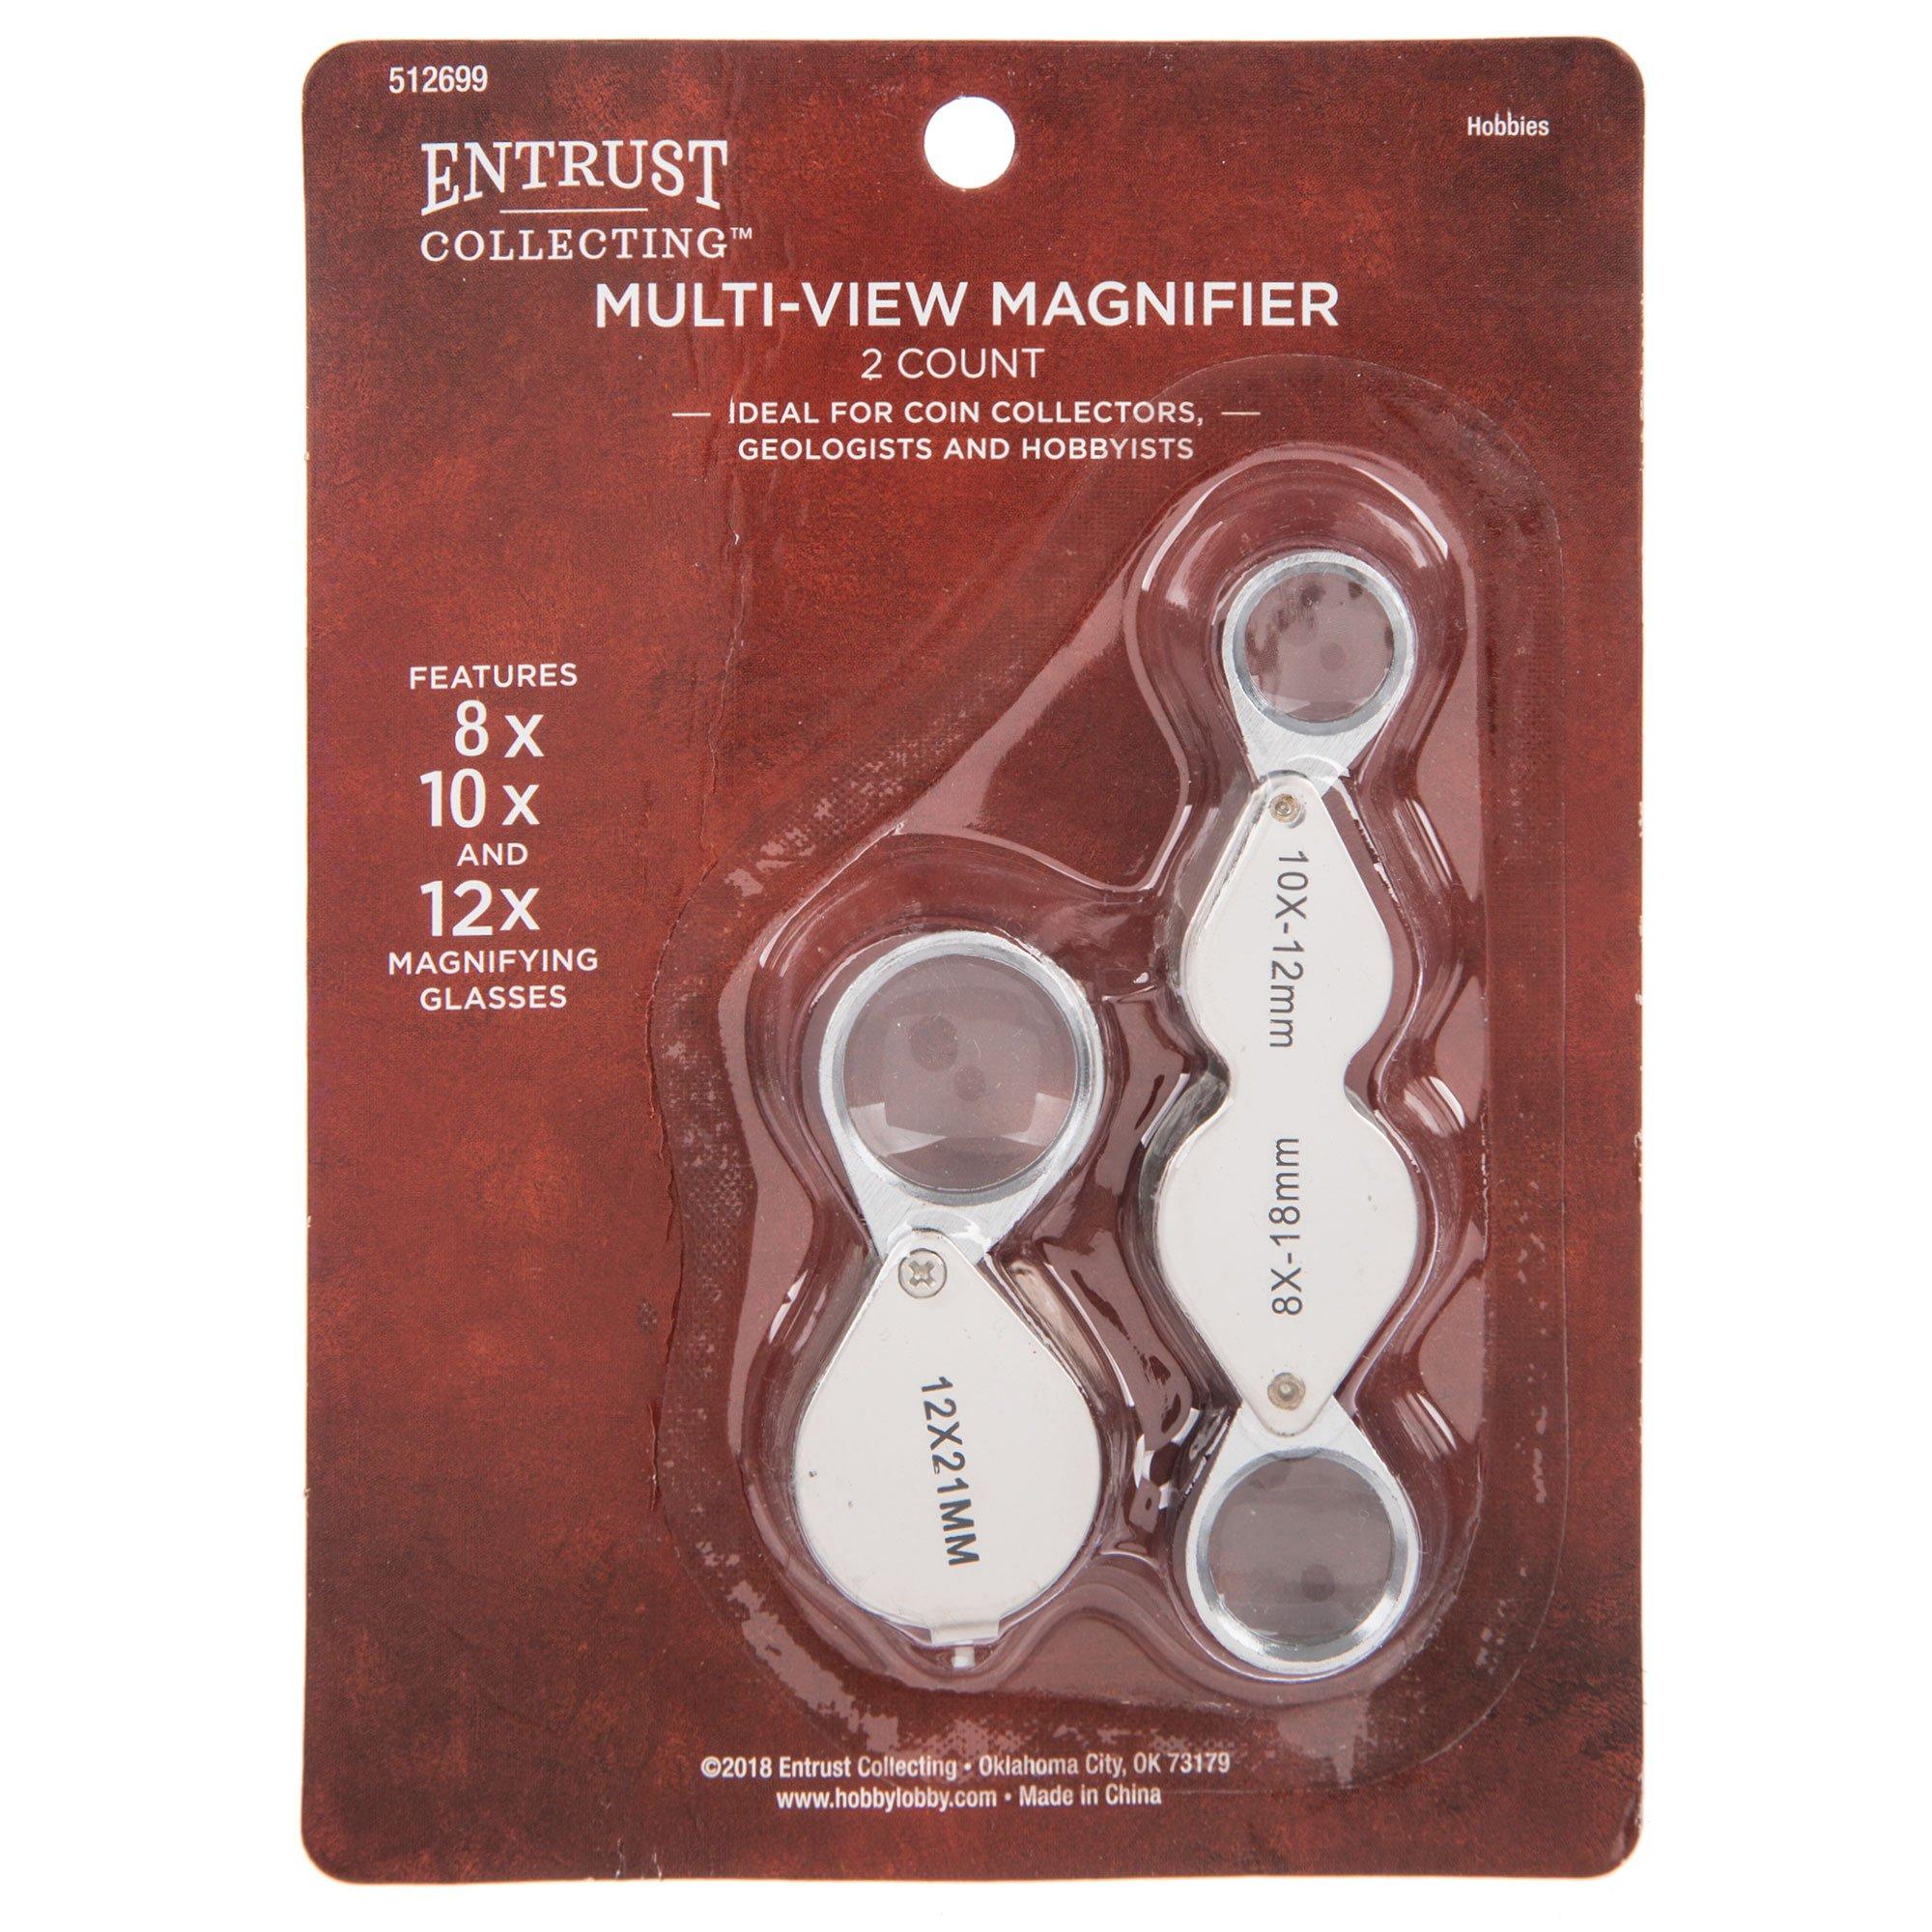 Multi-View Collapsible Magnifier, Hobby Lobby